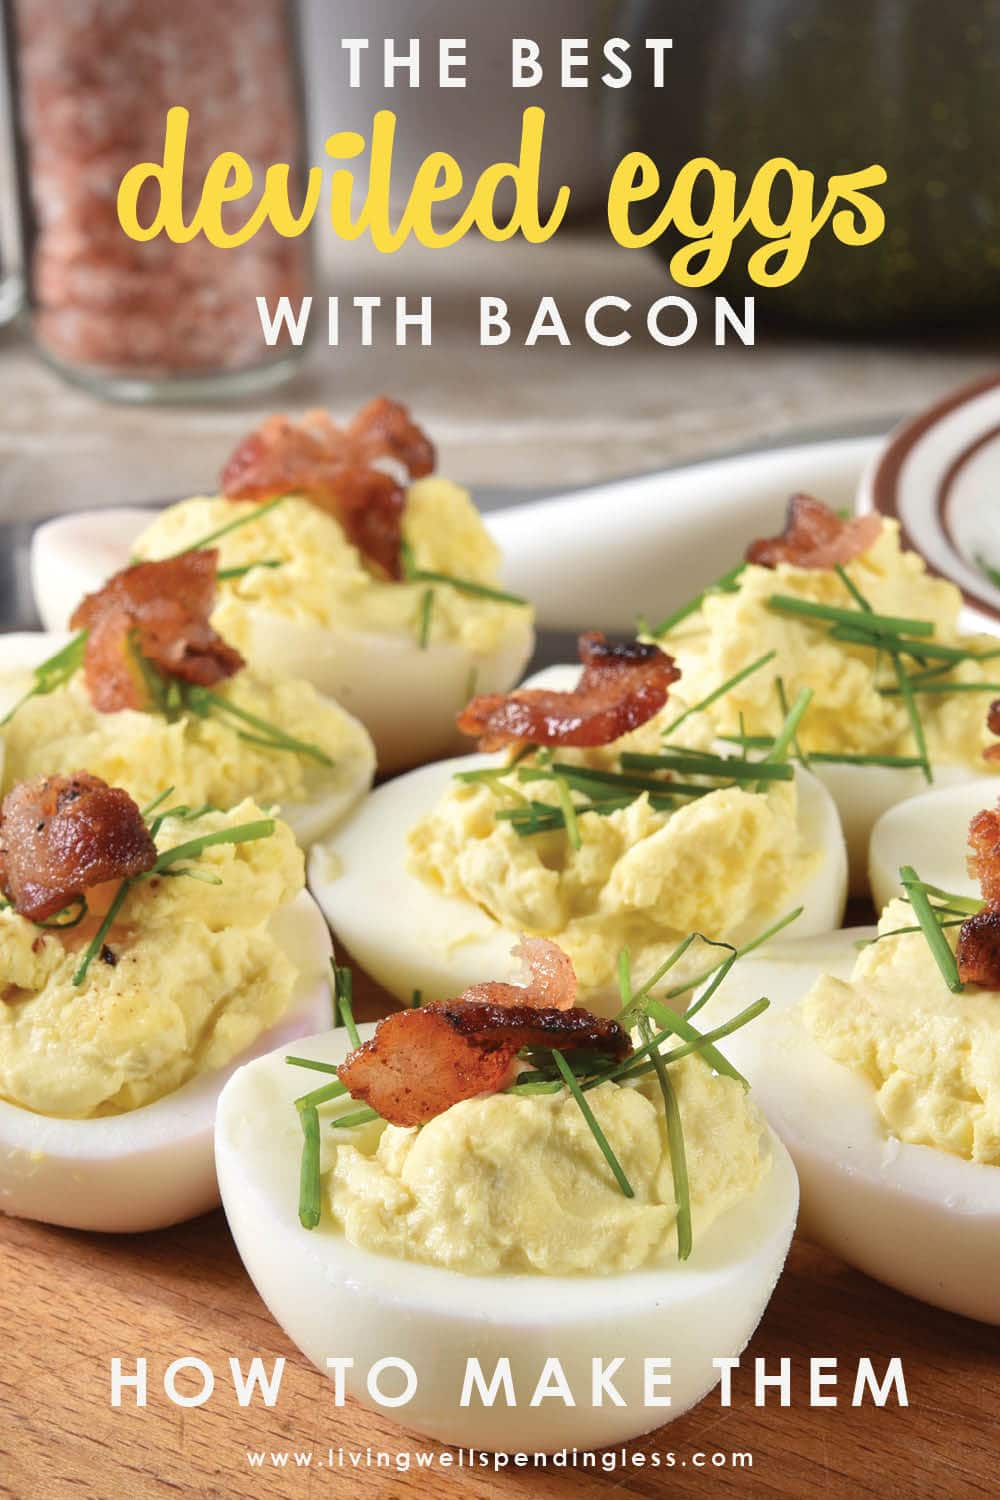 Want to know the secret to making the world's best deviled eggs? Don't miss this super simple, easy-to-follow recipe for perfect deviled eggs with BACON. (Mmmmm.....bacon!)